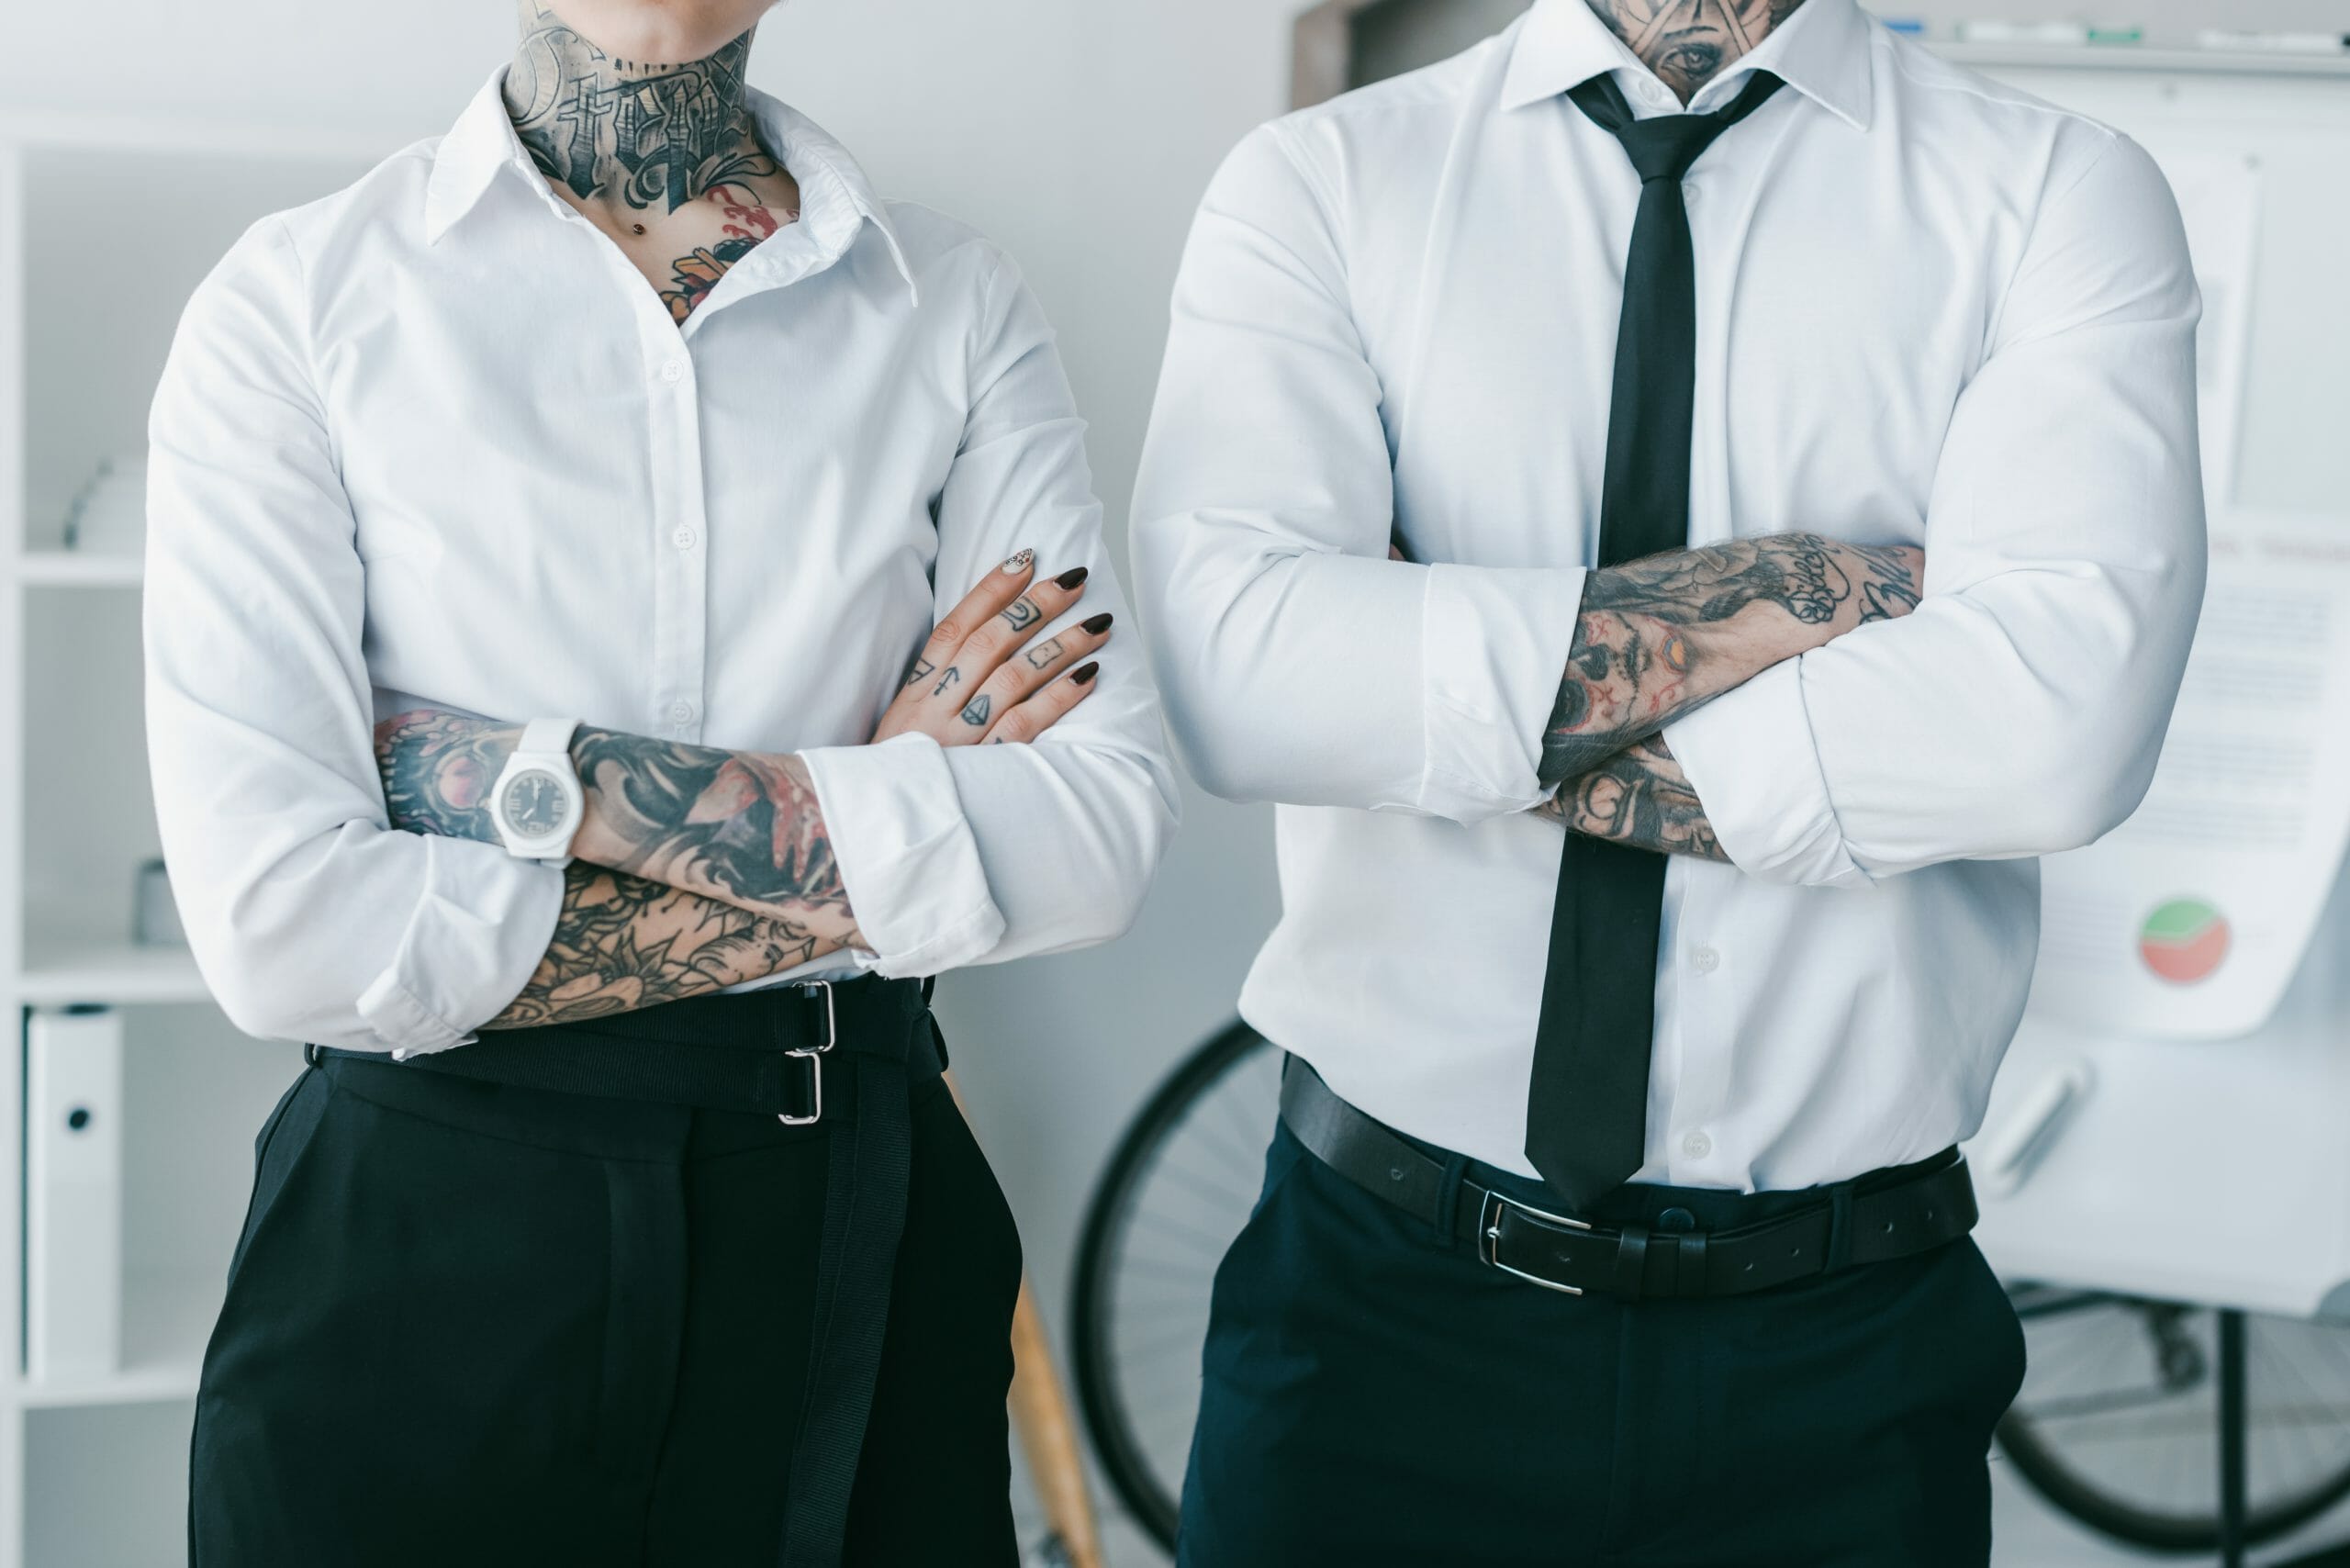 Are Tattoos Still Considered Unprofessional in the Workplace? - Trill Mag